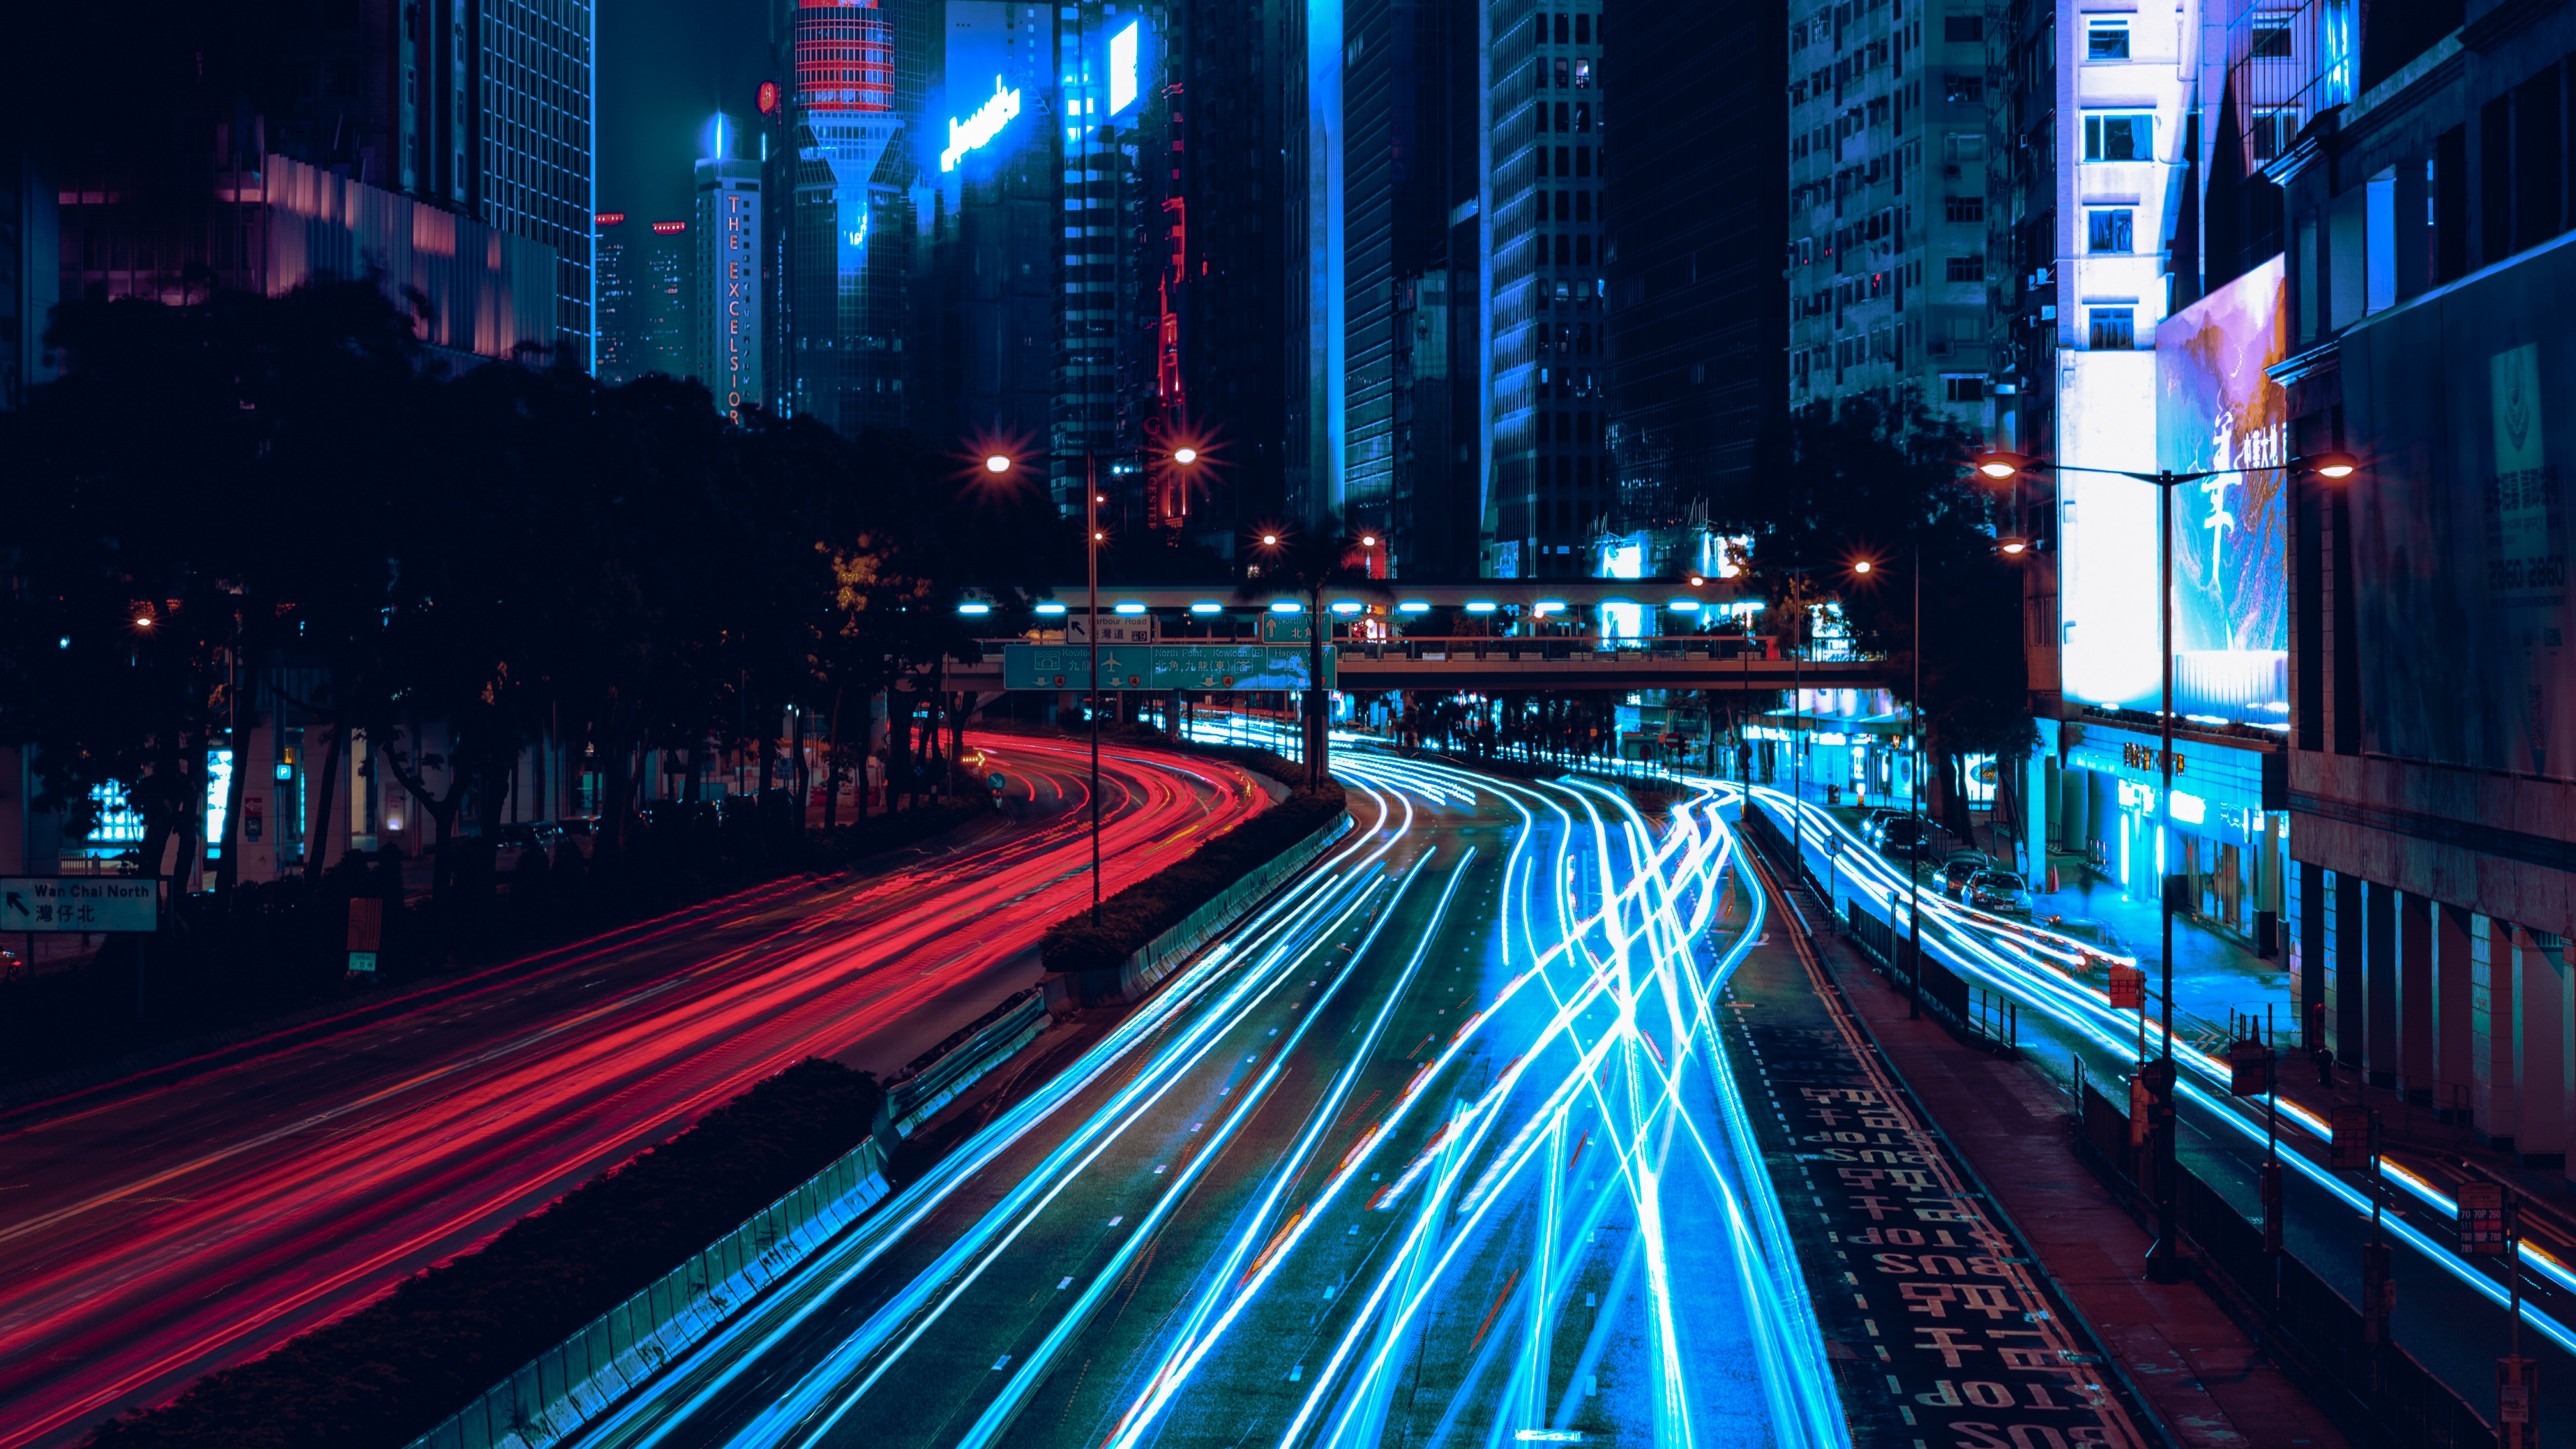 Time Lapse Photography of Cars on Road During Night Time. Wallpaper in 3840x2160 Resolution